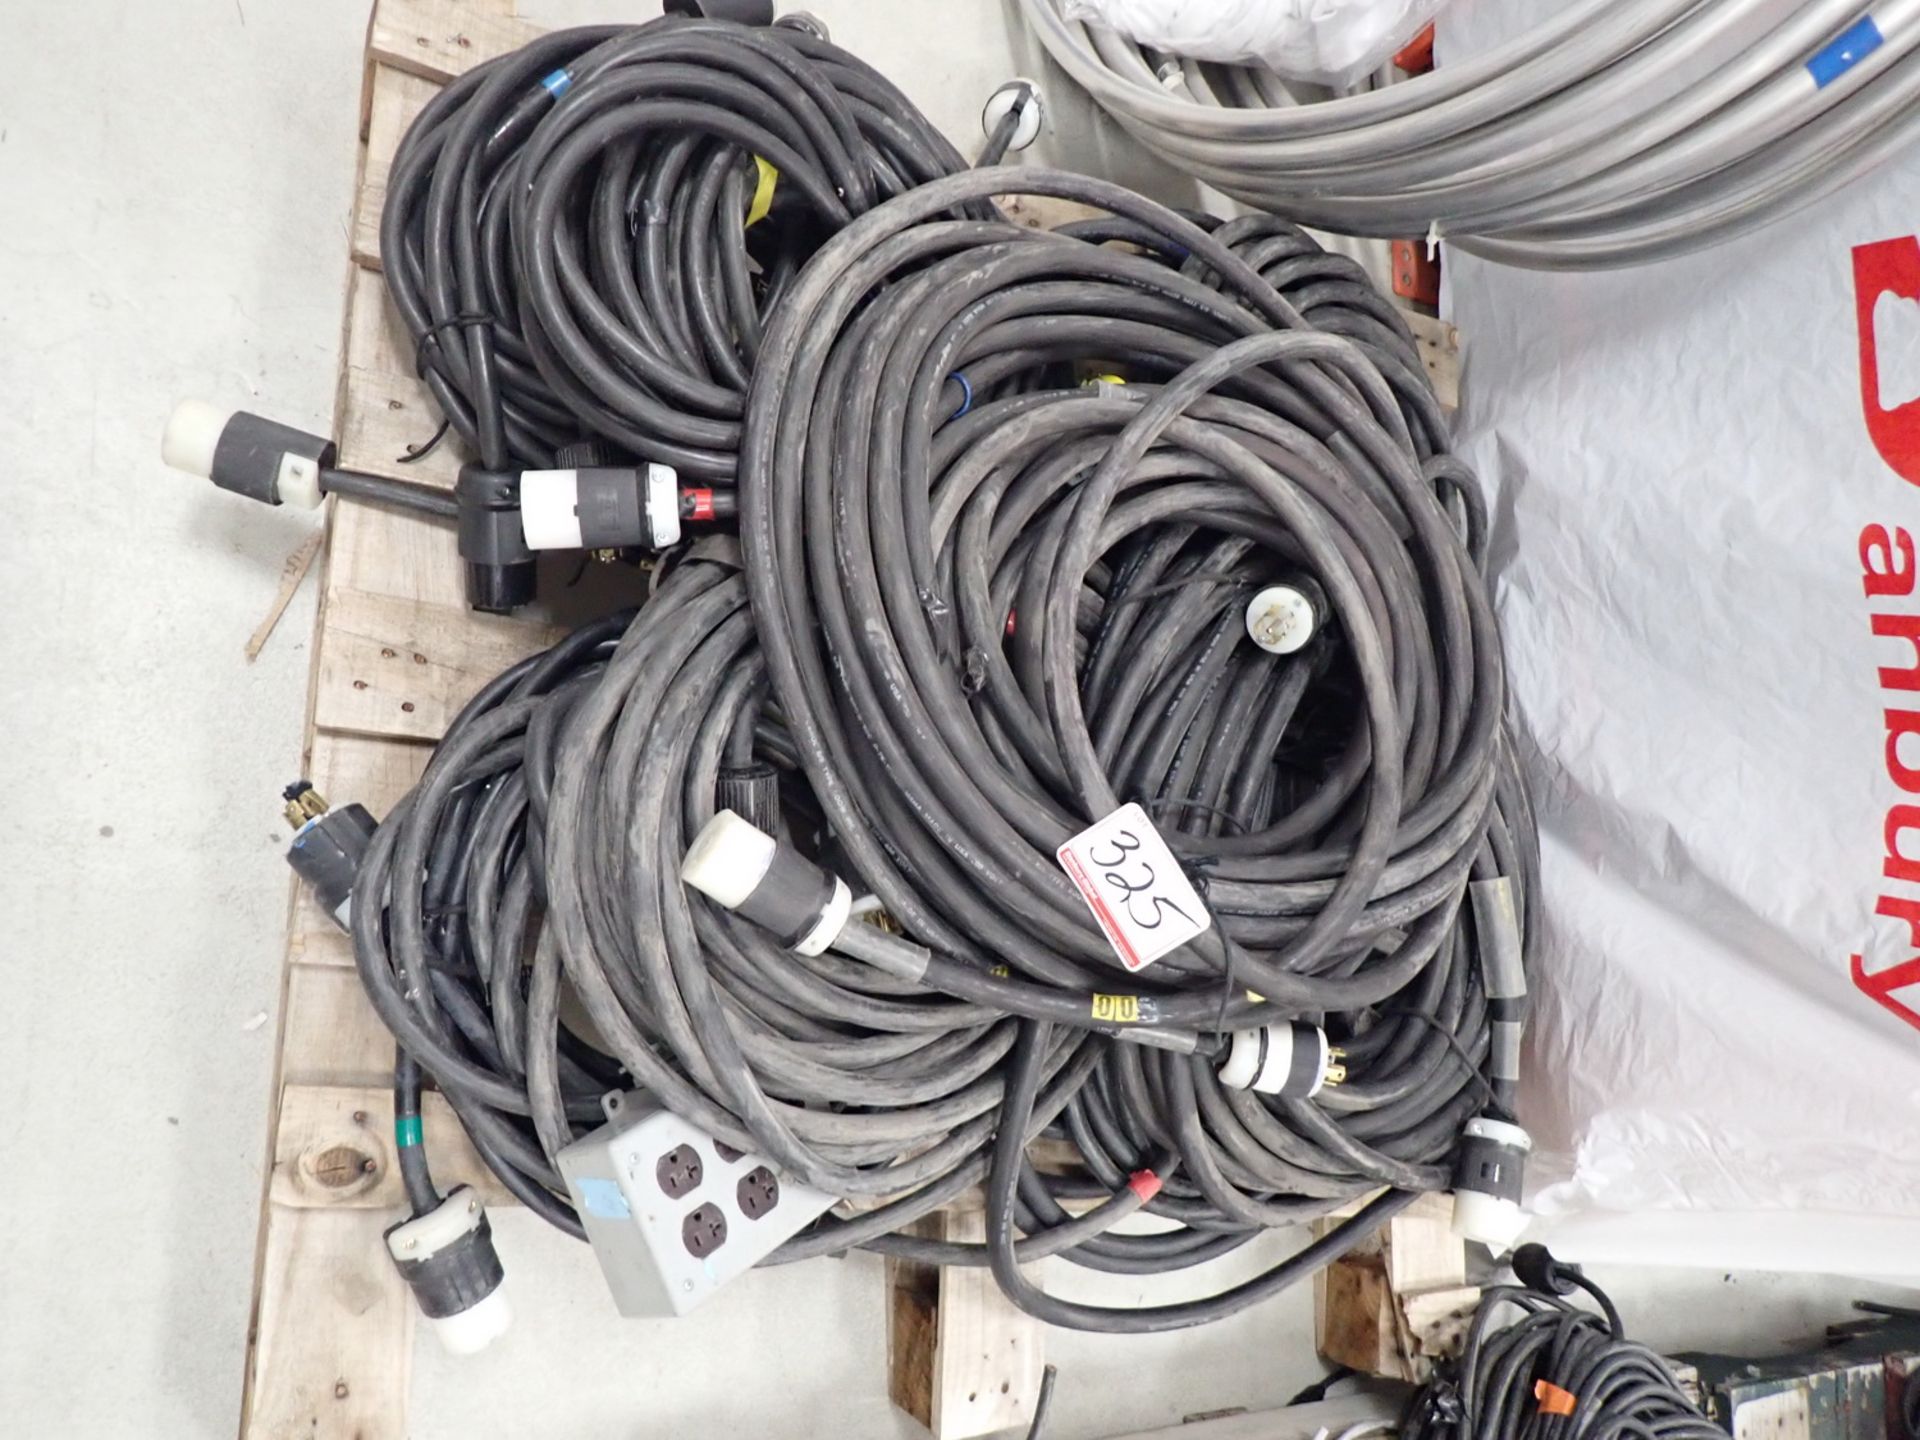 LOT - 30 AMP 3-PHASE ASSTD CABLE